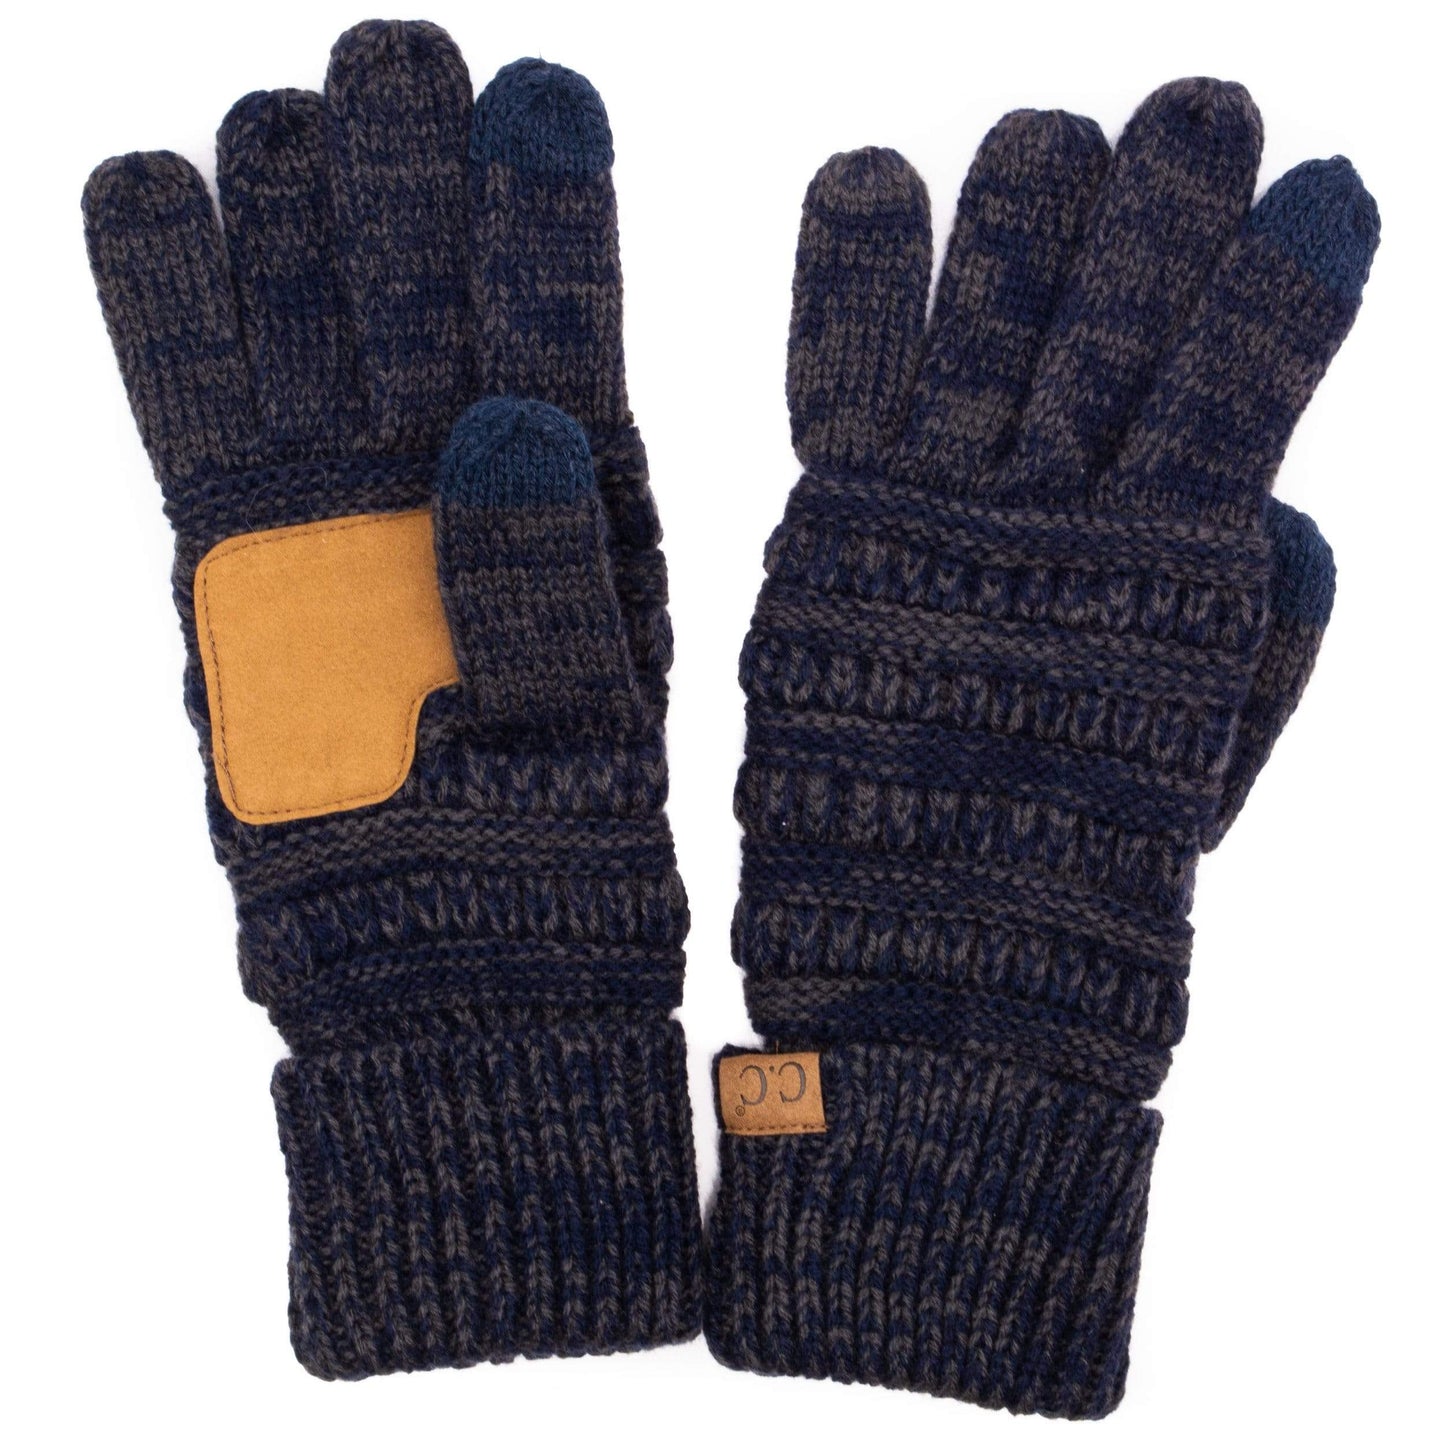 C.C Apparel Navy/Lt Grey C.C Unisex Cable Knit Winter Warm Anti-Slip Two-Toned Touchscreen Texting Gloves